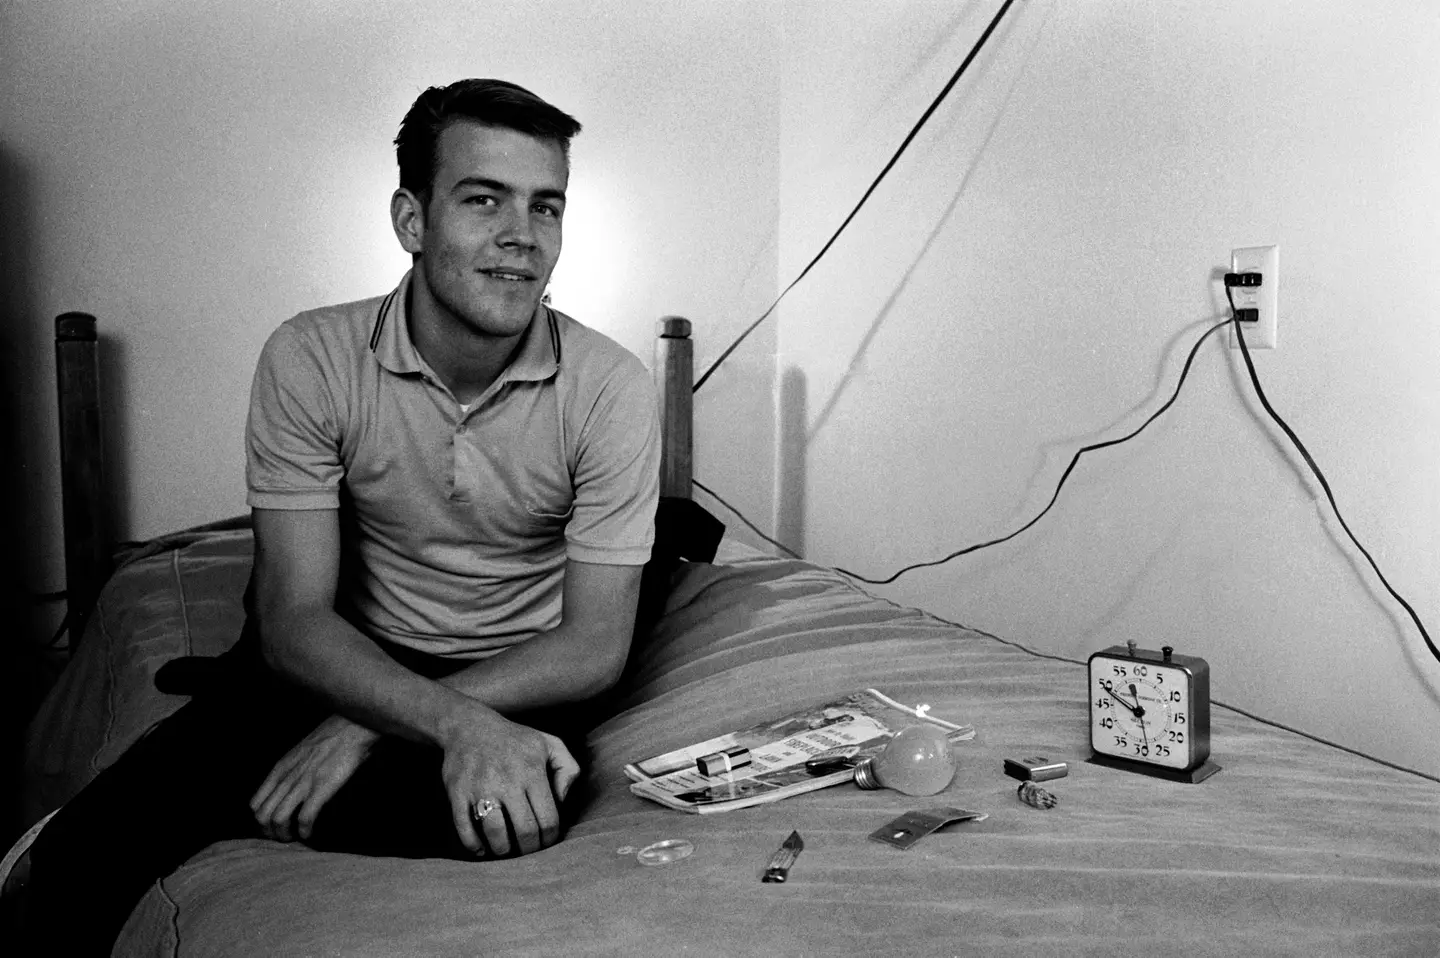 Randy Gardner was just 17 when he took part in the experiment. (Don Cravens/Getty Image)